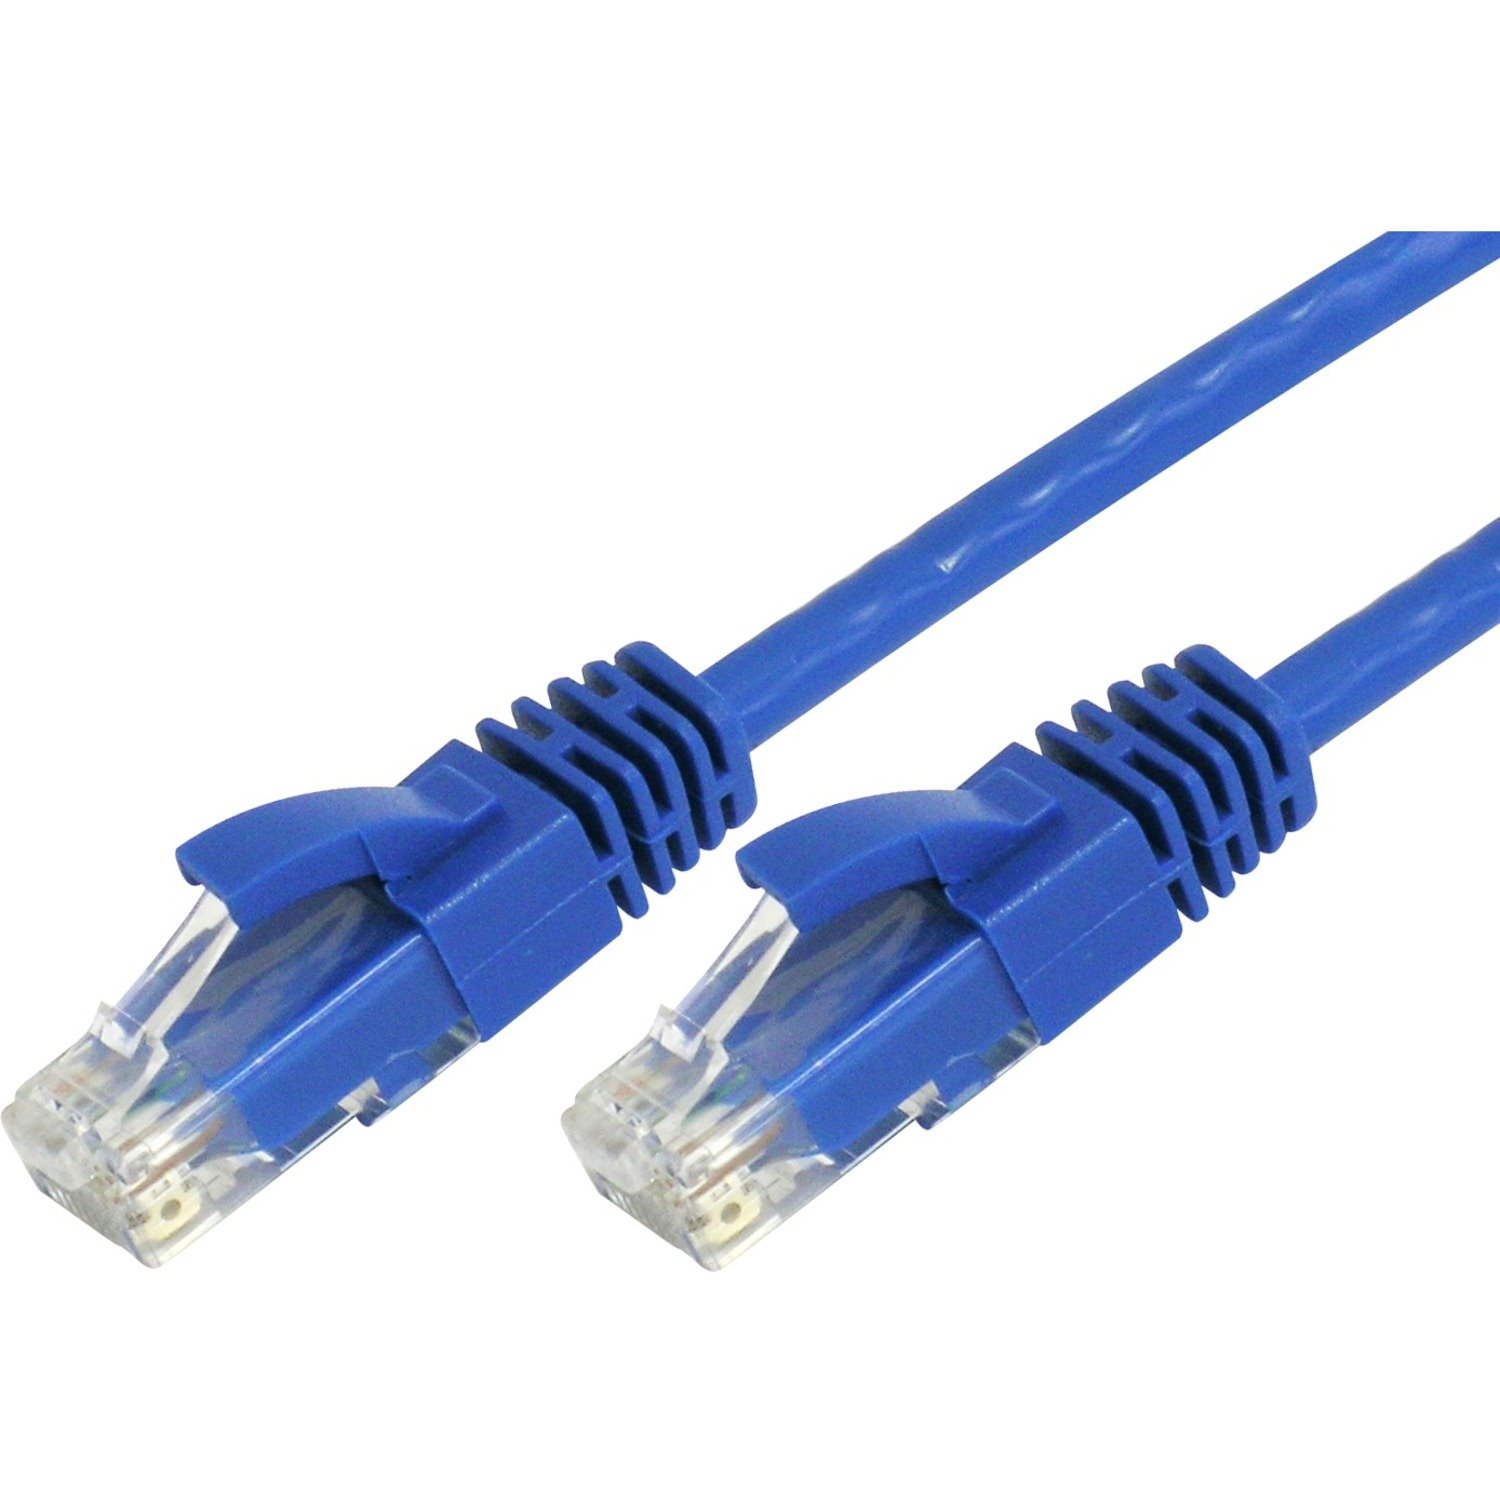 Comsol 2 m Category 5e Network Cable for Hub, Switch, Router, Modem, Patch Panel, Network Device